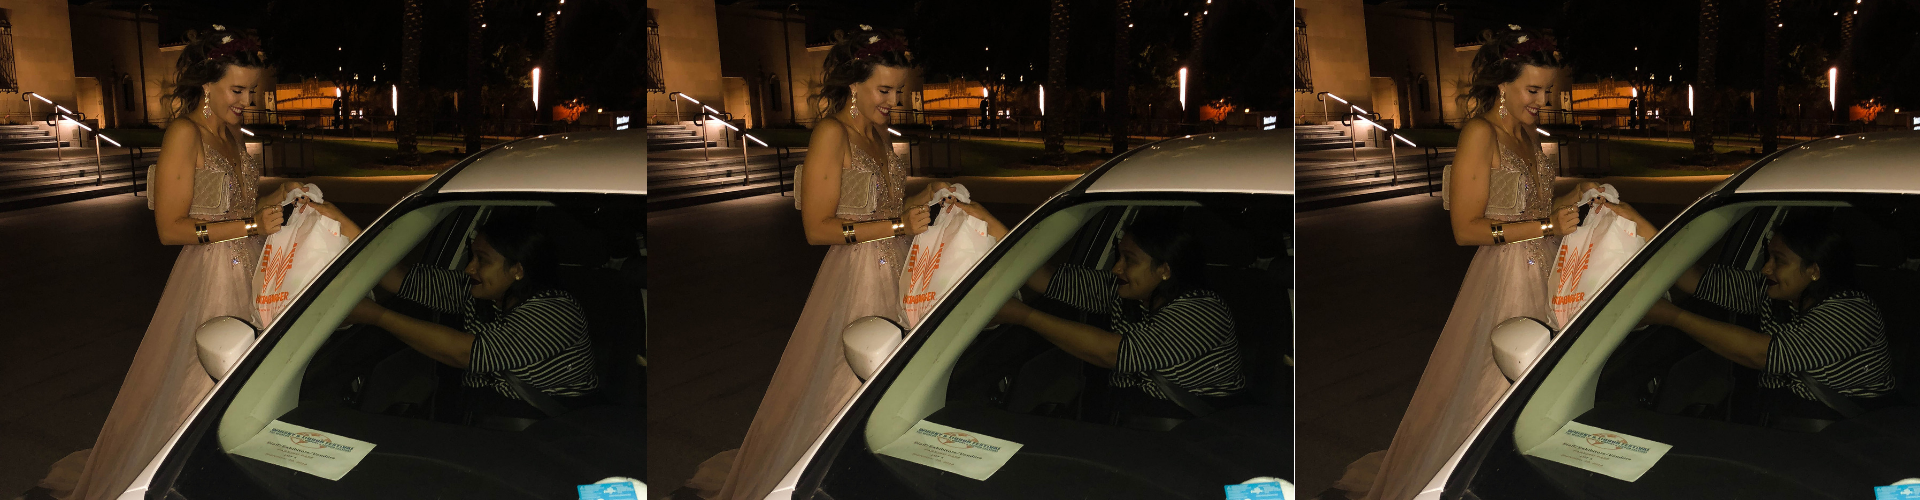 Favor Delivery to the rescue: A Whataburger love story